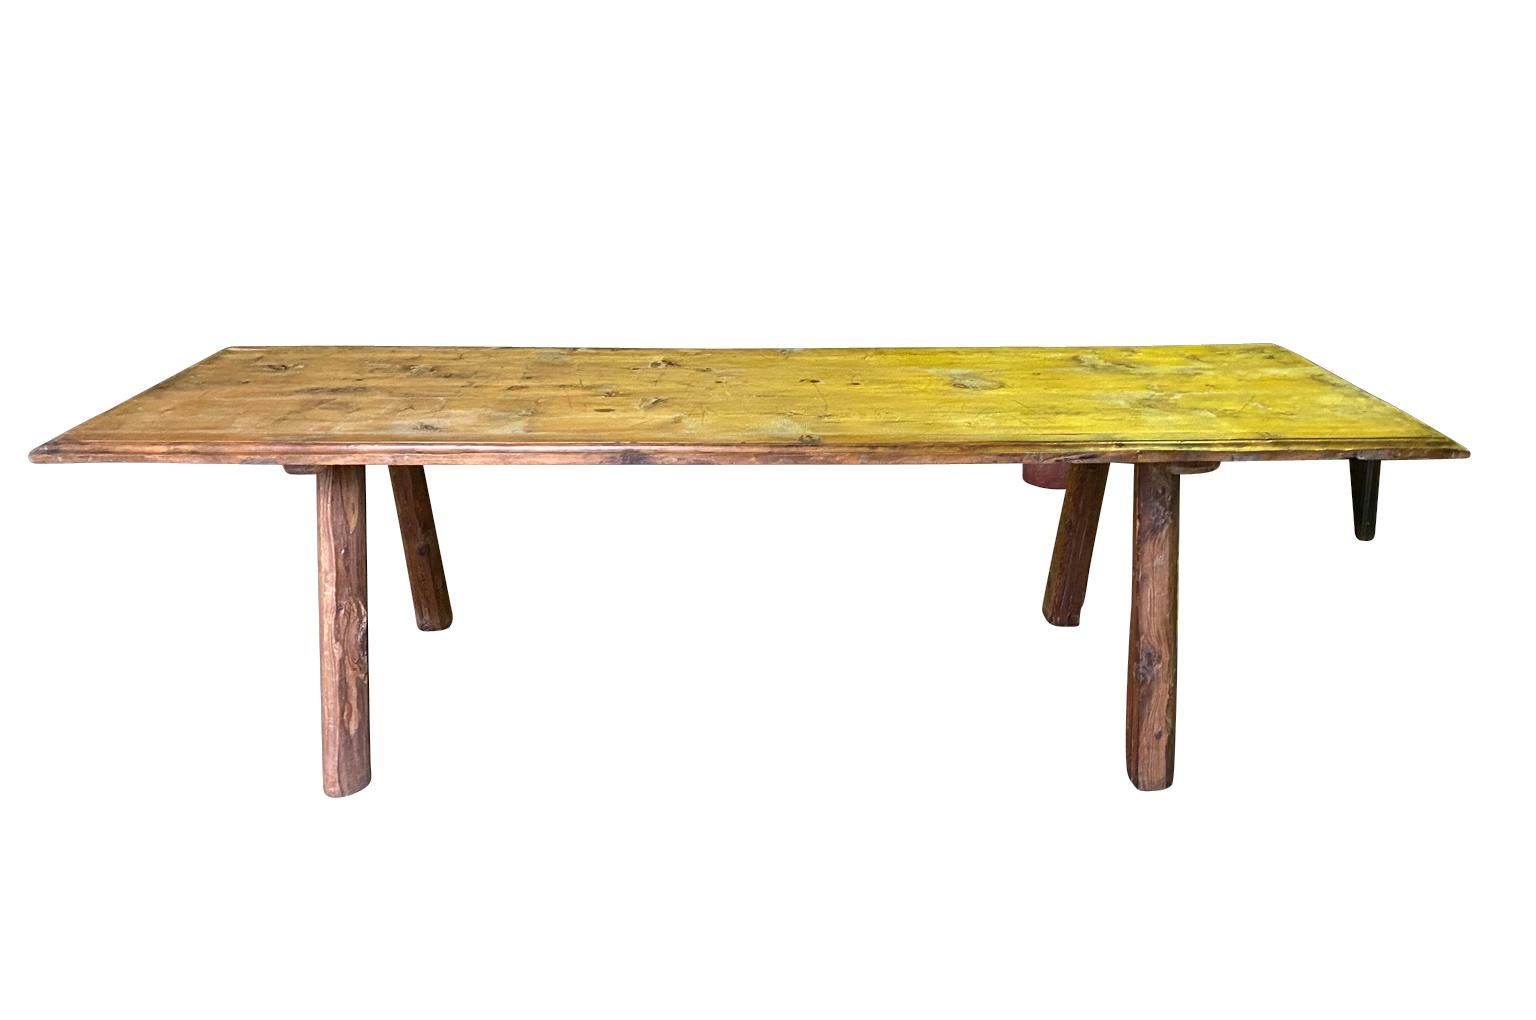 A very handsome 18th century Farm table from the Southwest of France. Soundly constructed from Meleze - a very hard pine, with a wonderful top with a nice edge finish.